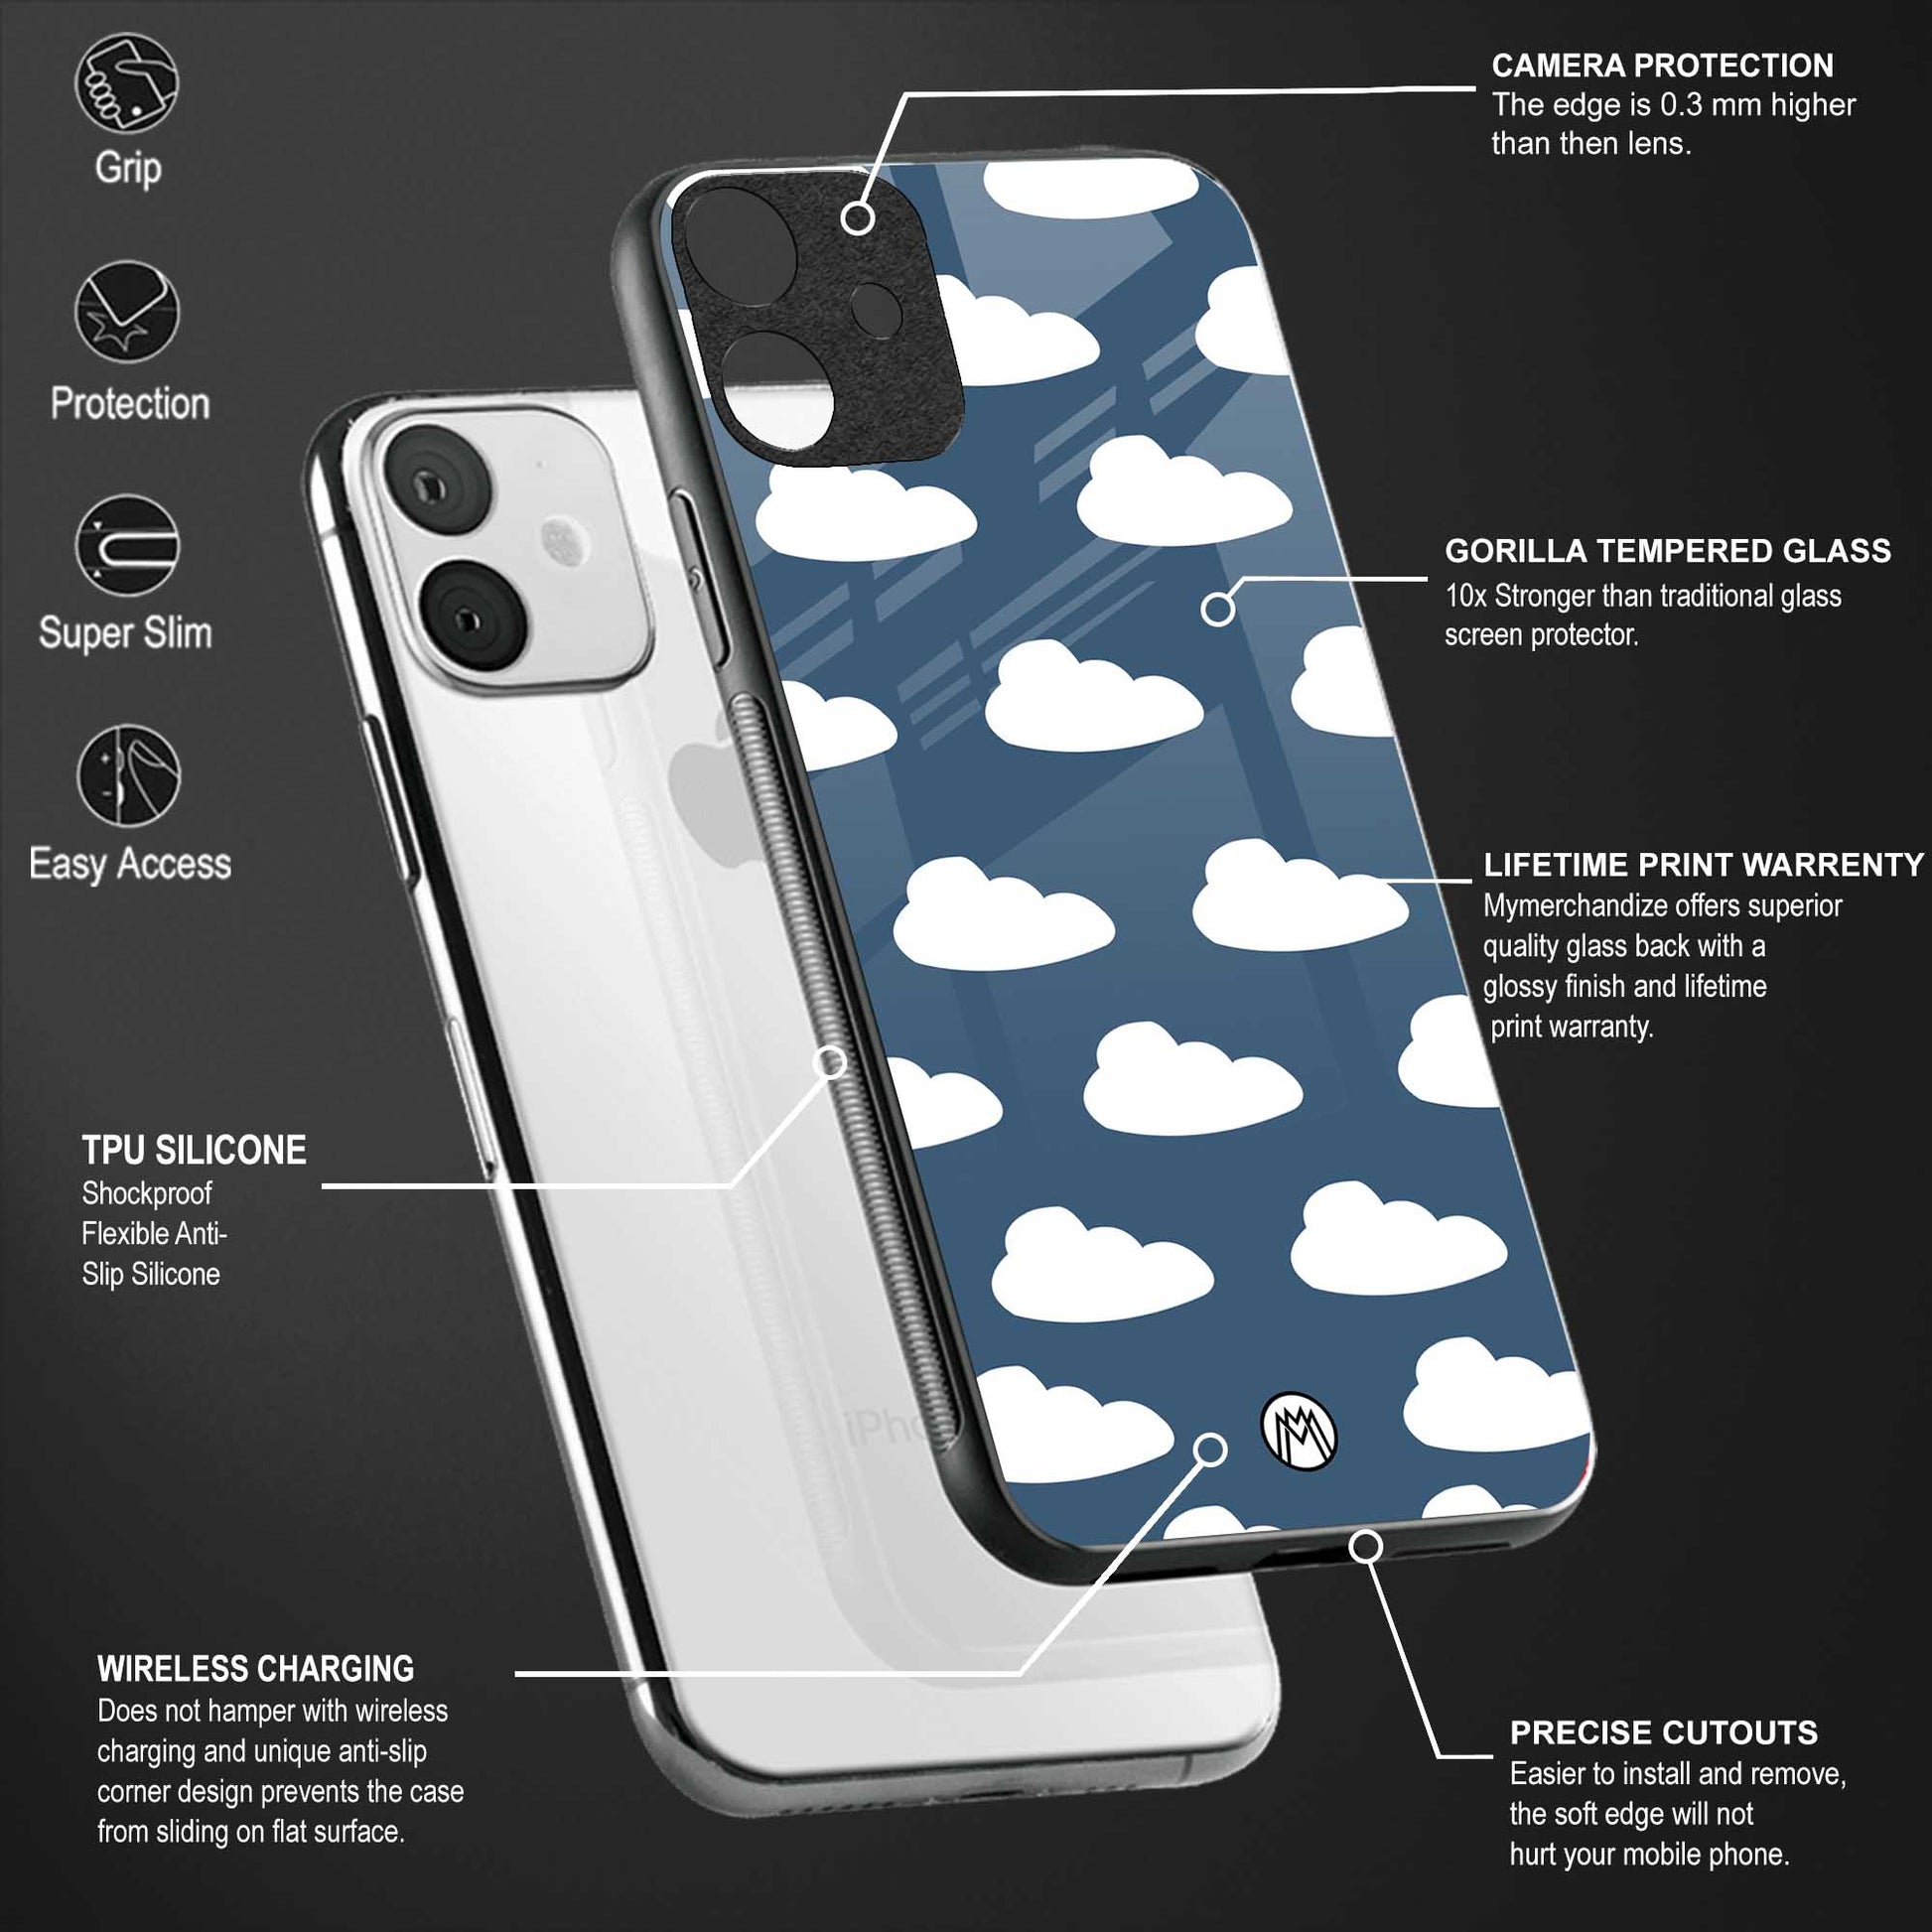 clouds back phone cover | glass case for oppo f21 pro 5g